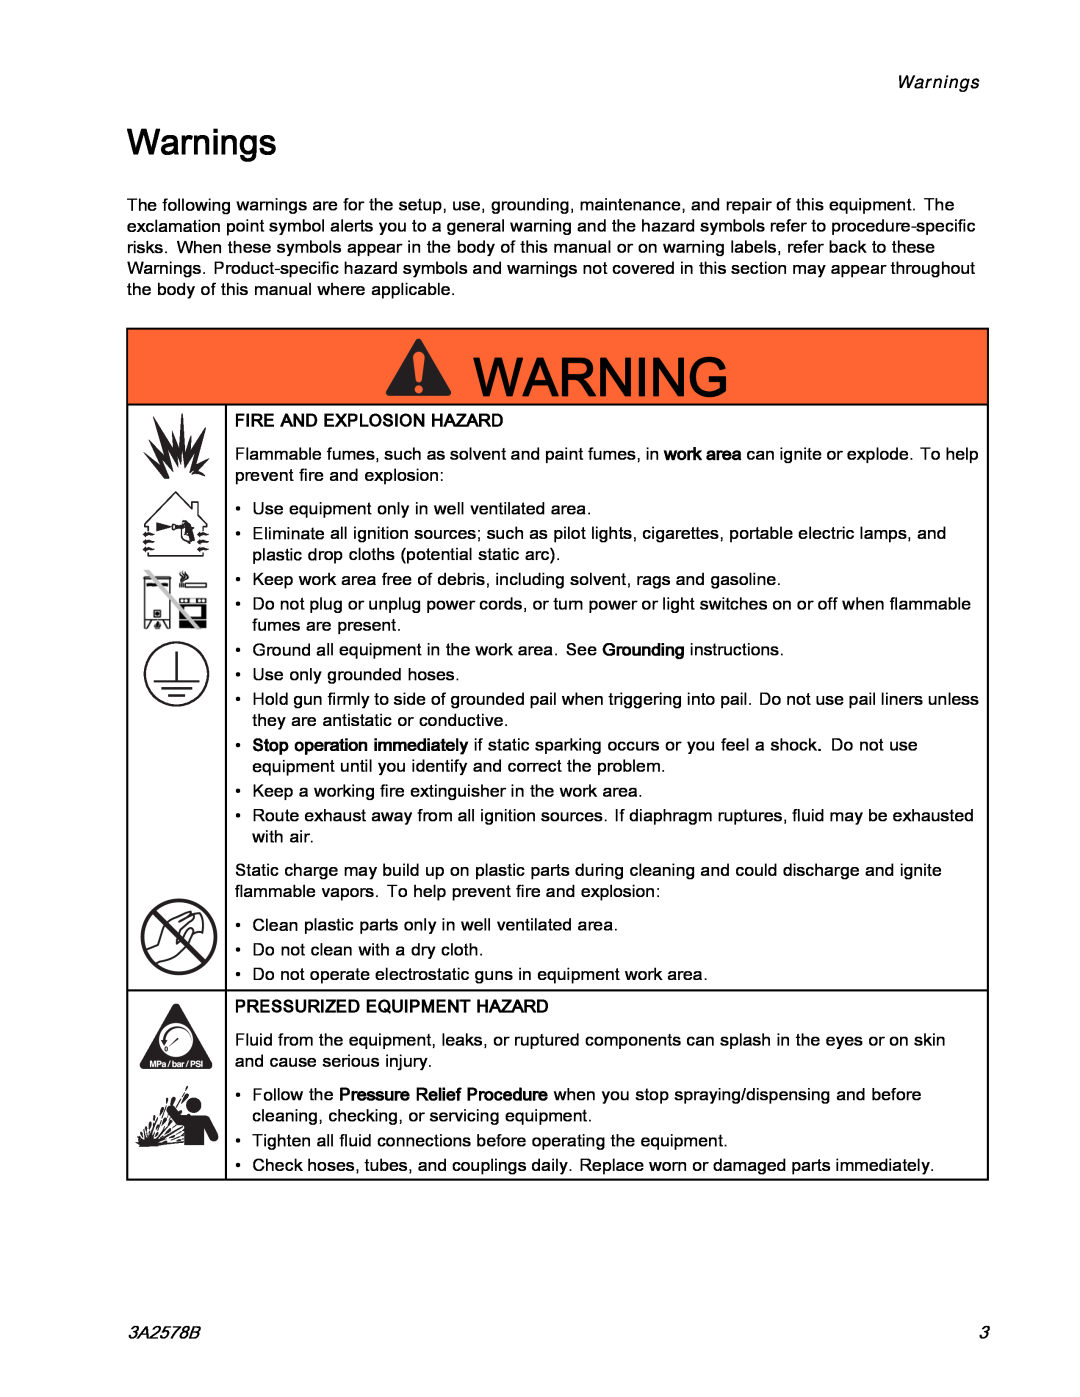 Graco 3A2578B important safety instructions Warnings, Fire And Explosion Hazard, Pressurized Equipment Hazard 